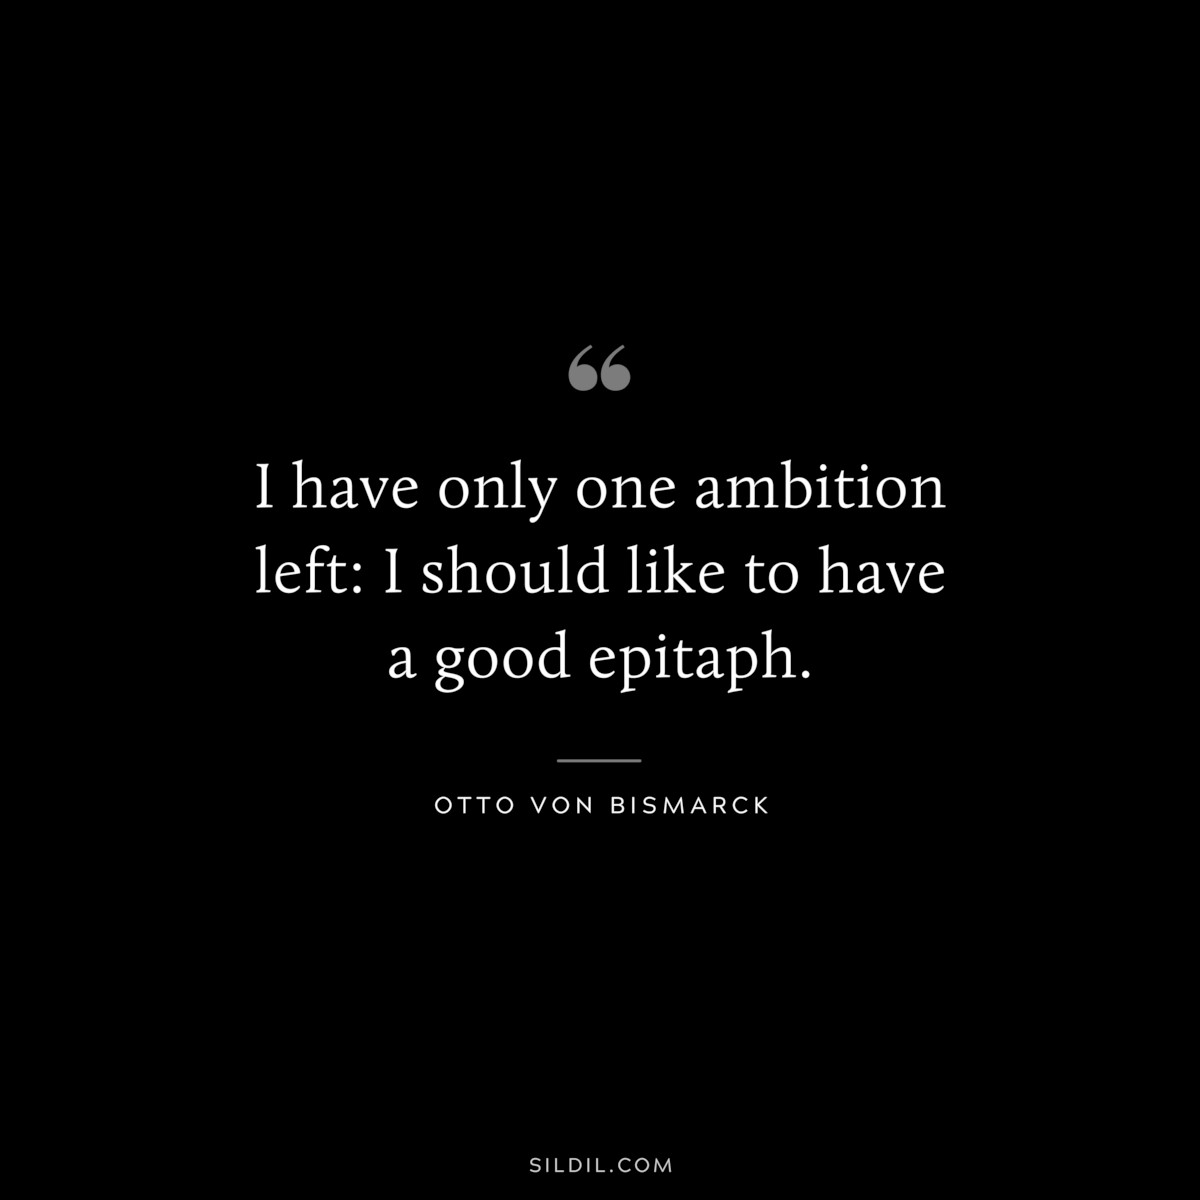 I have only one ambition left: I should like to have a good epitaph. ― Otto von Bismarck